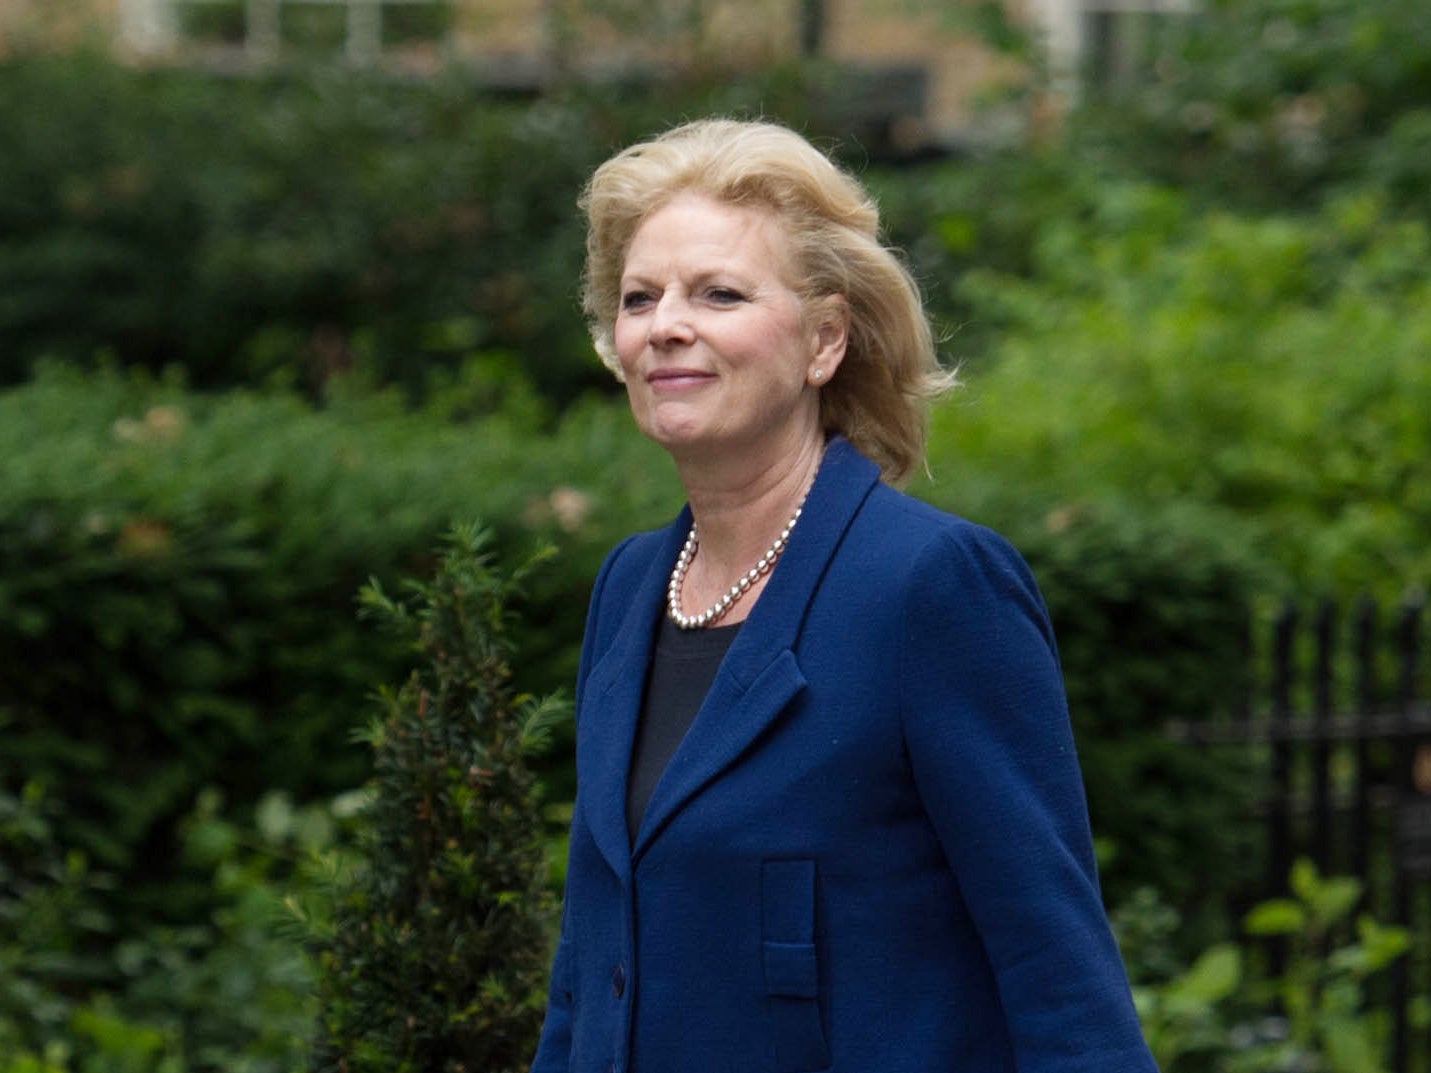 Conservative MP Anna Soubry said 'I can't see anything in it I don't approve of and could not support'